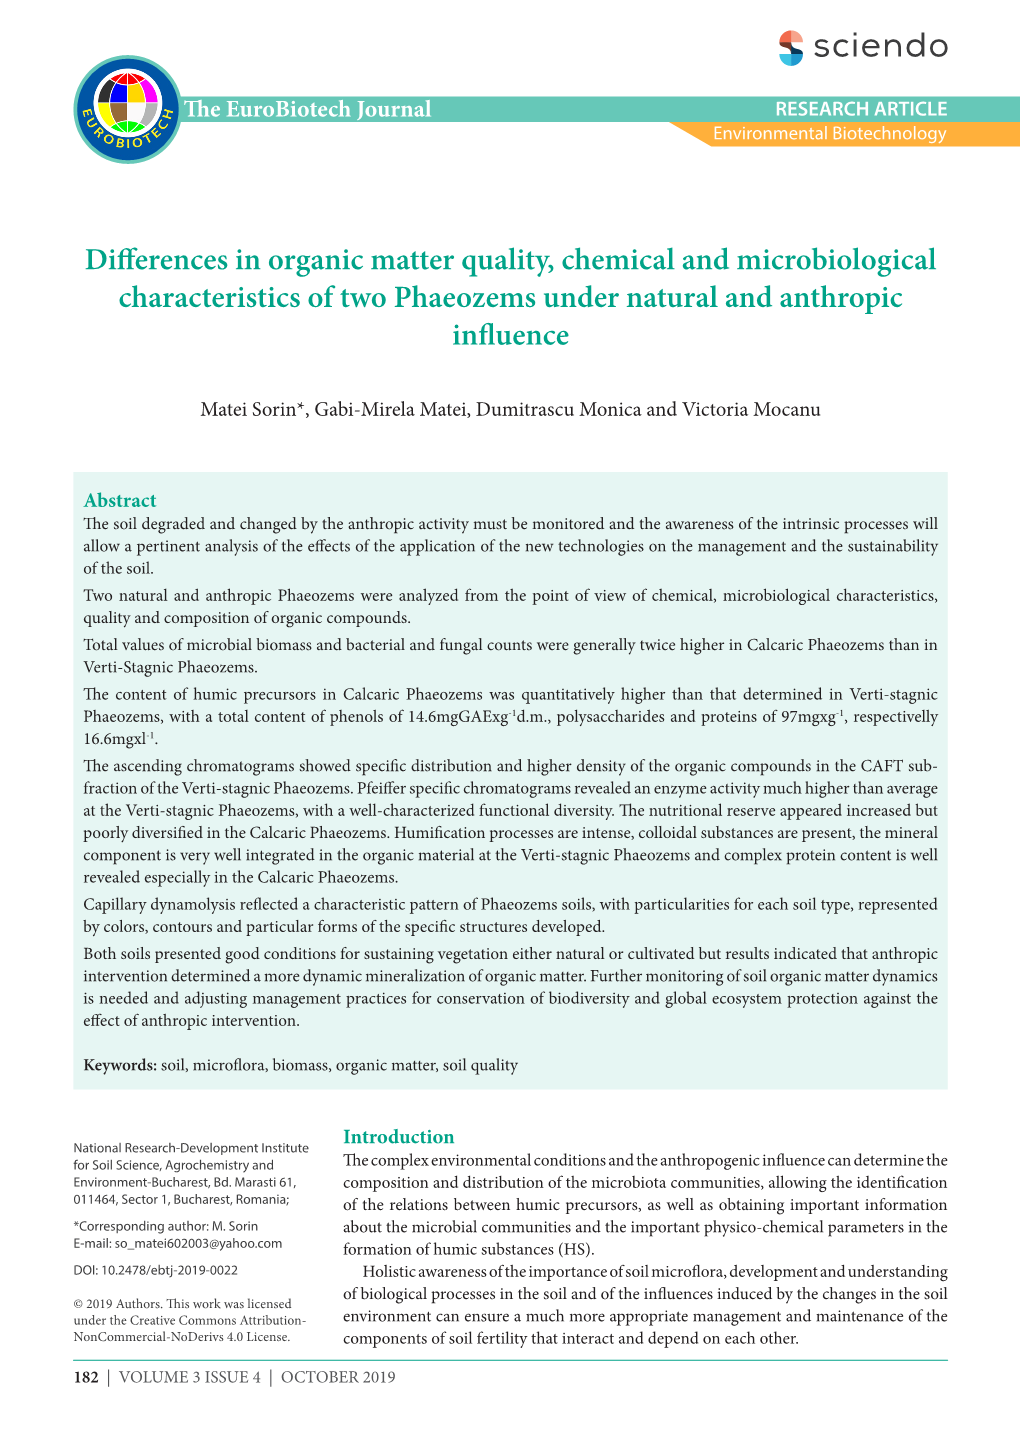 Differences in Organic Matter Quality, Chemical and Microbiological Characteristics of Two Phaeozems Under Natural and Anthropic Influence